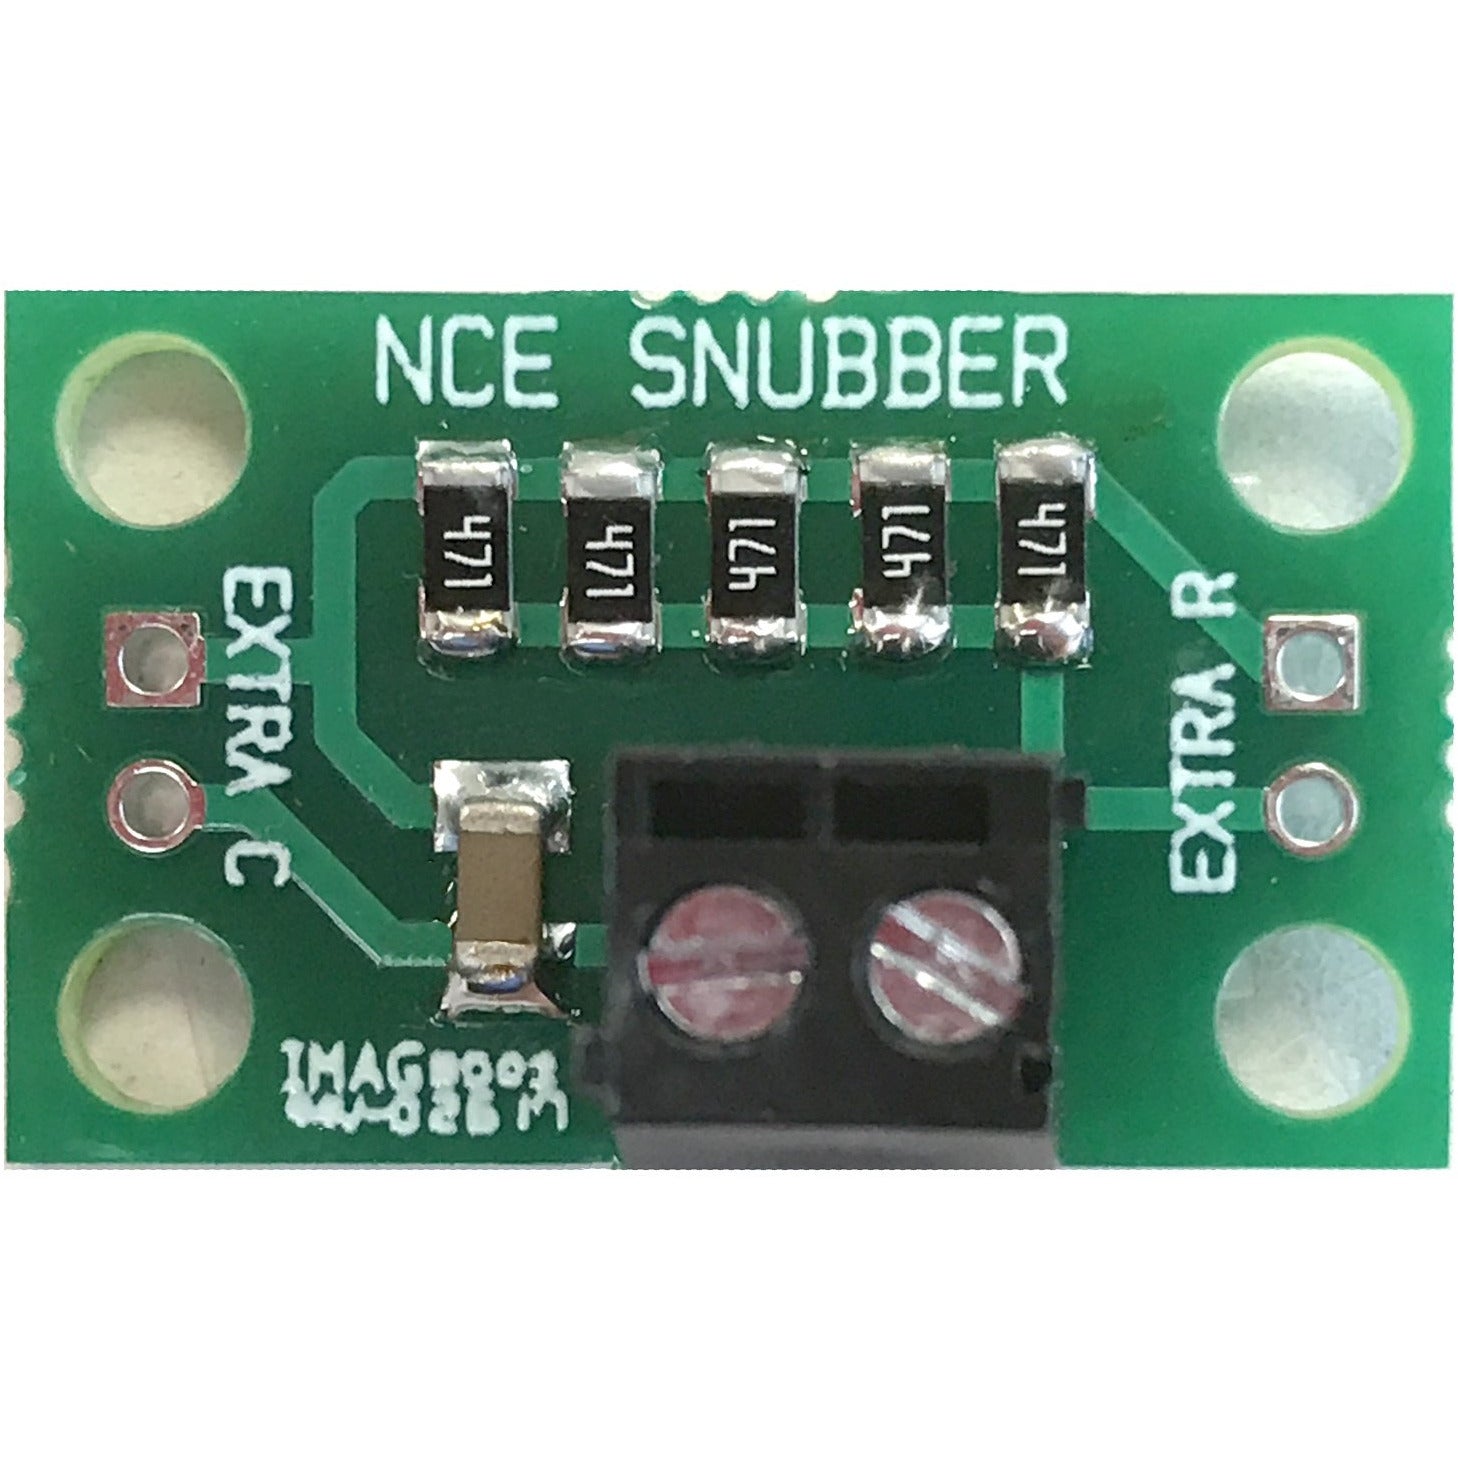 NCE RC Filter (Snubber) Noise Suppressor 2 Pack - Use for DCC Systems to prevent voltage spikes